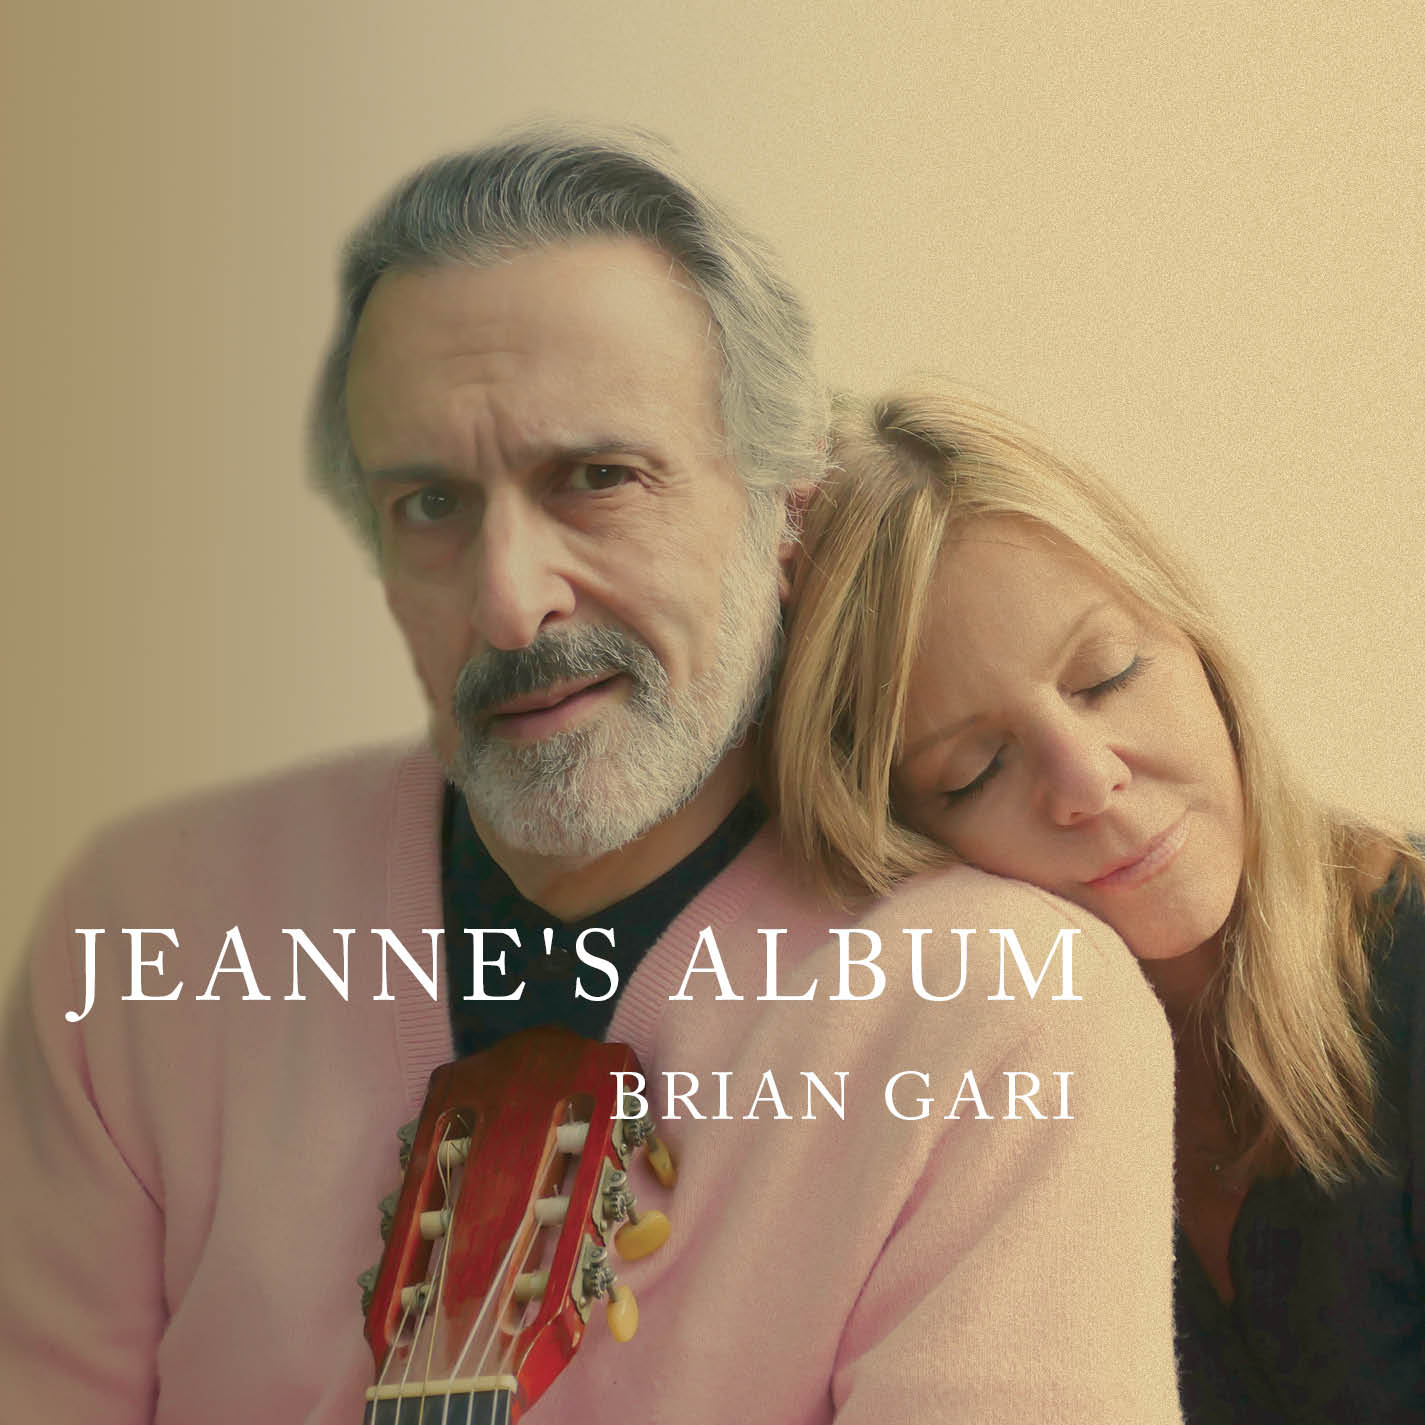 Album cover, "Jeanne's Album, Brian Gari". Garihods the head of the guitar against his chest, and a woman rests her head on his shoulder, her eyes closed.